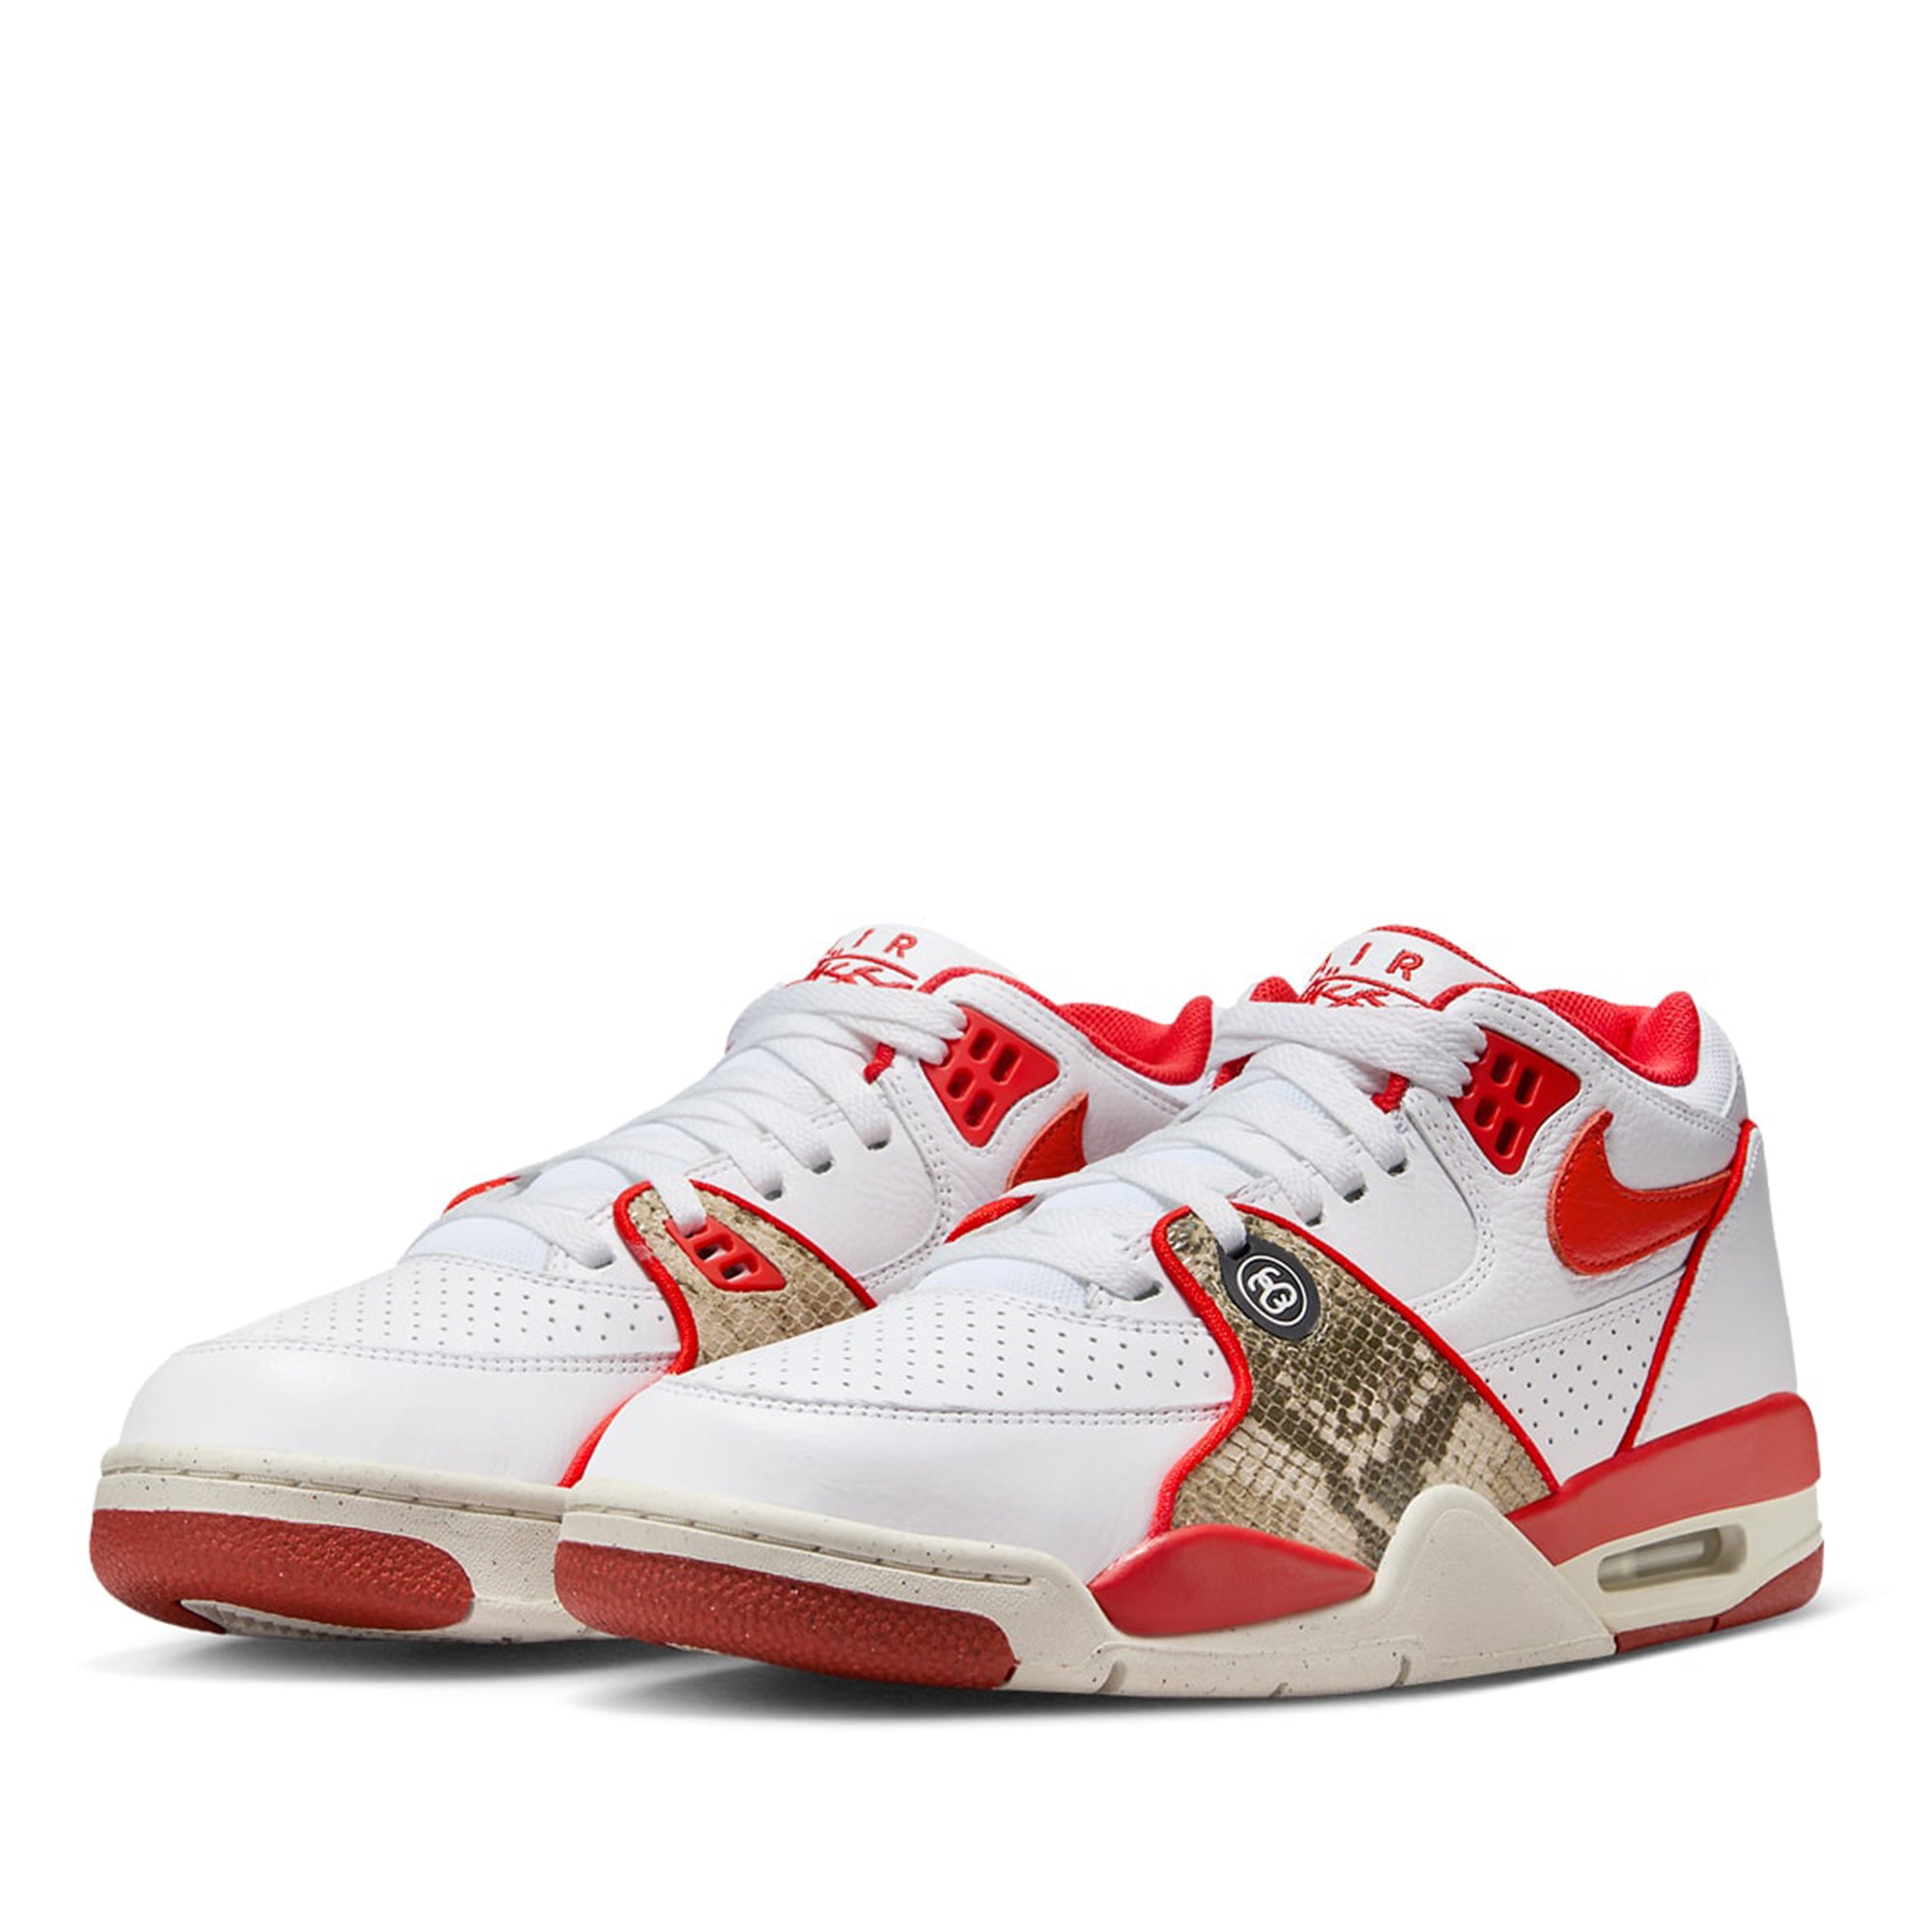 NIKE - Stüssy Men's Air Flight '89 Low SP - (White/Red) view 3